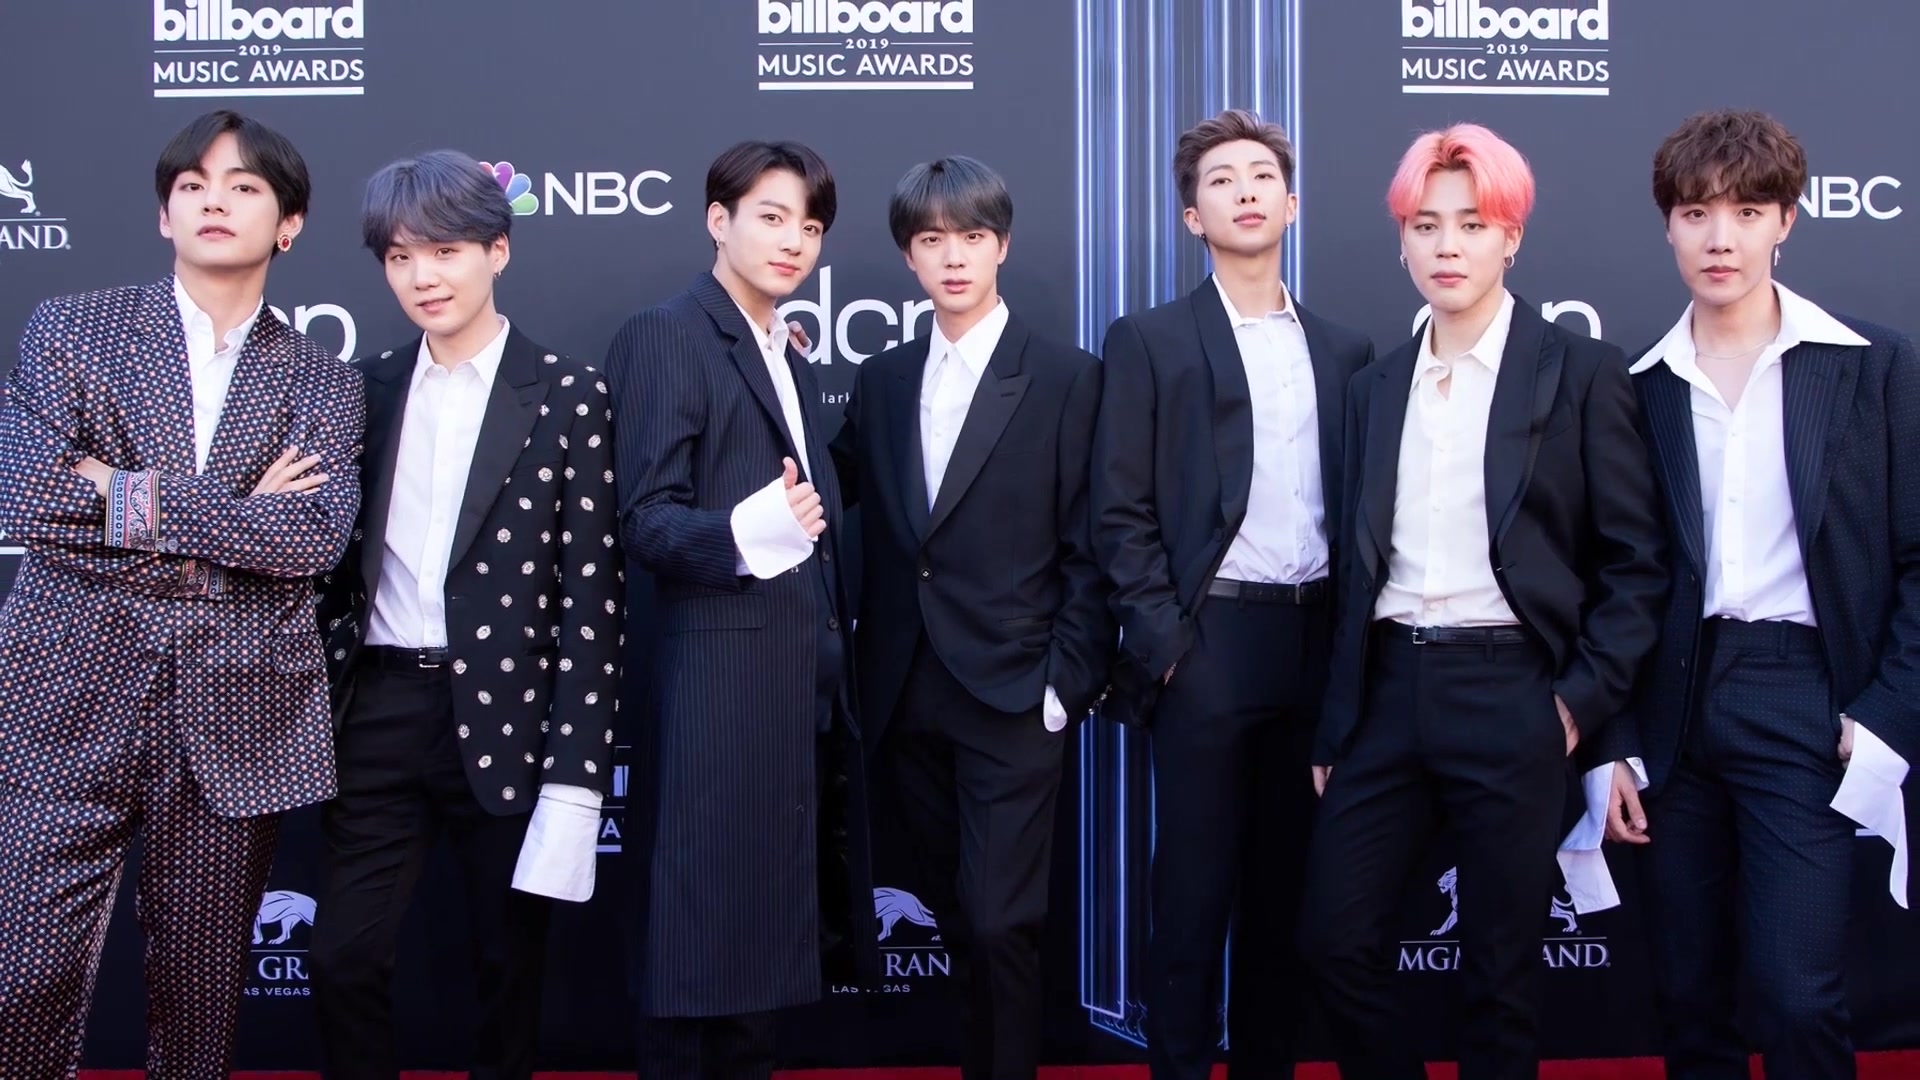 Learn These 7 Interesting Facts About BTS Members